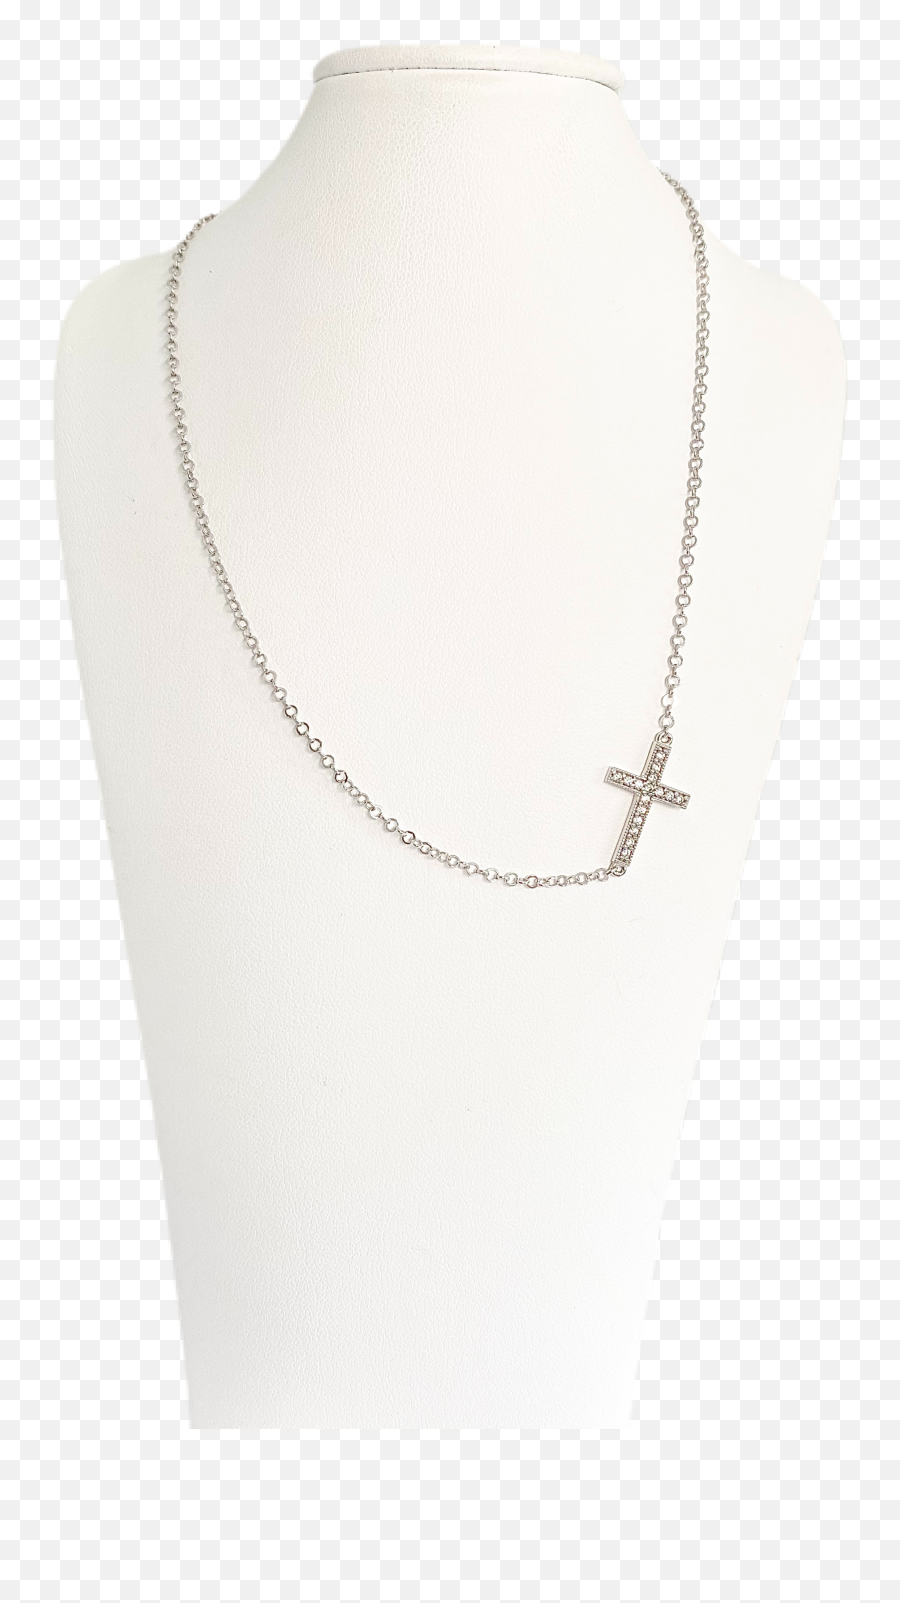 10 Karat White Gold Side Cross Necklace With Cubic Zirconia Emoji,Cross Necklace Png